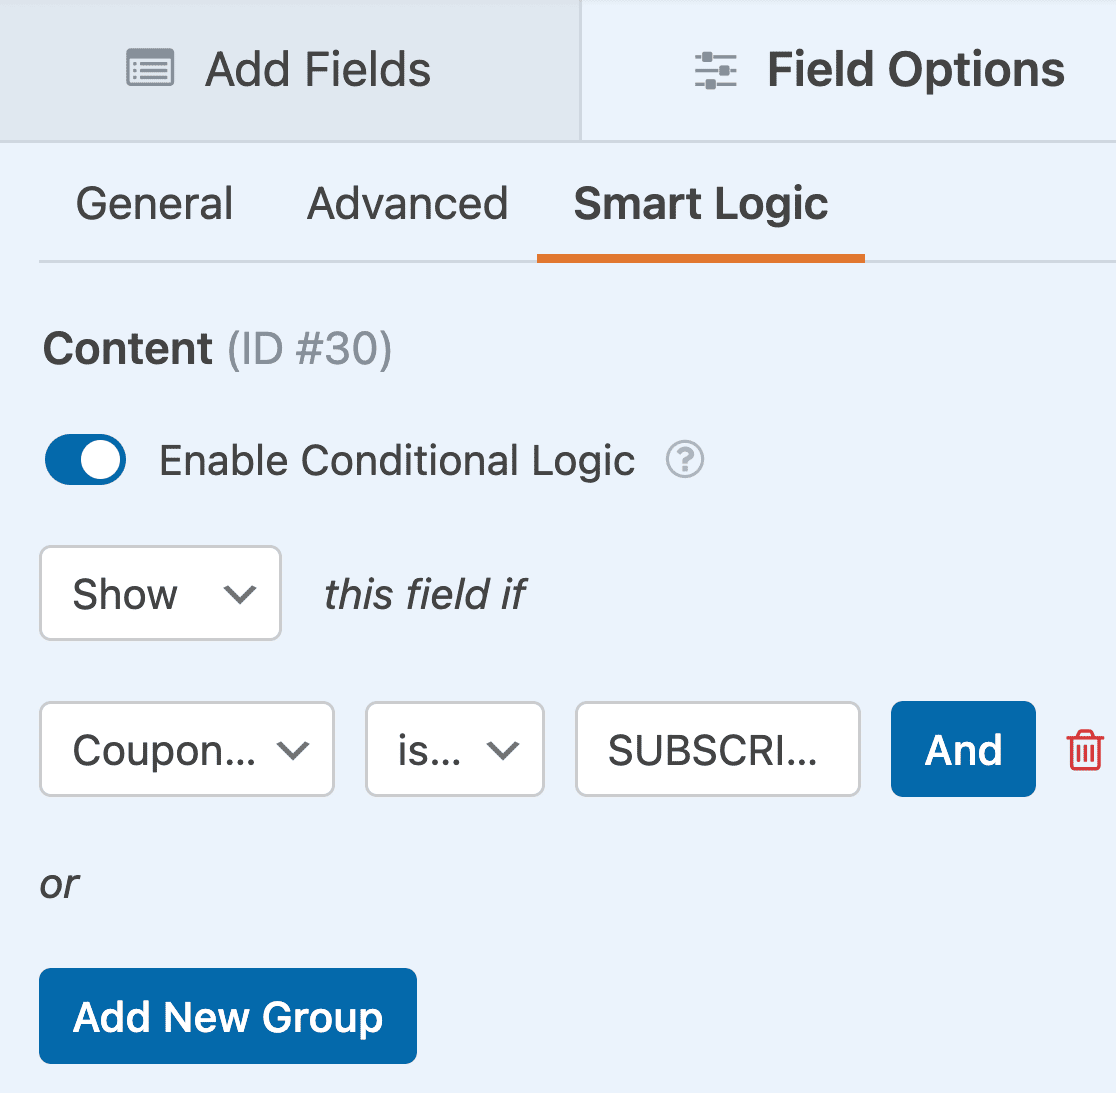 Creating a conditional logic rule to show a failure message if the wrong coupon code is entered